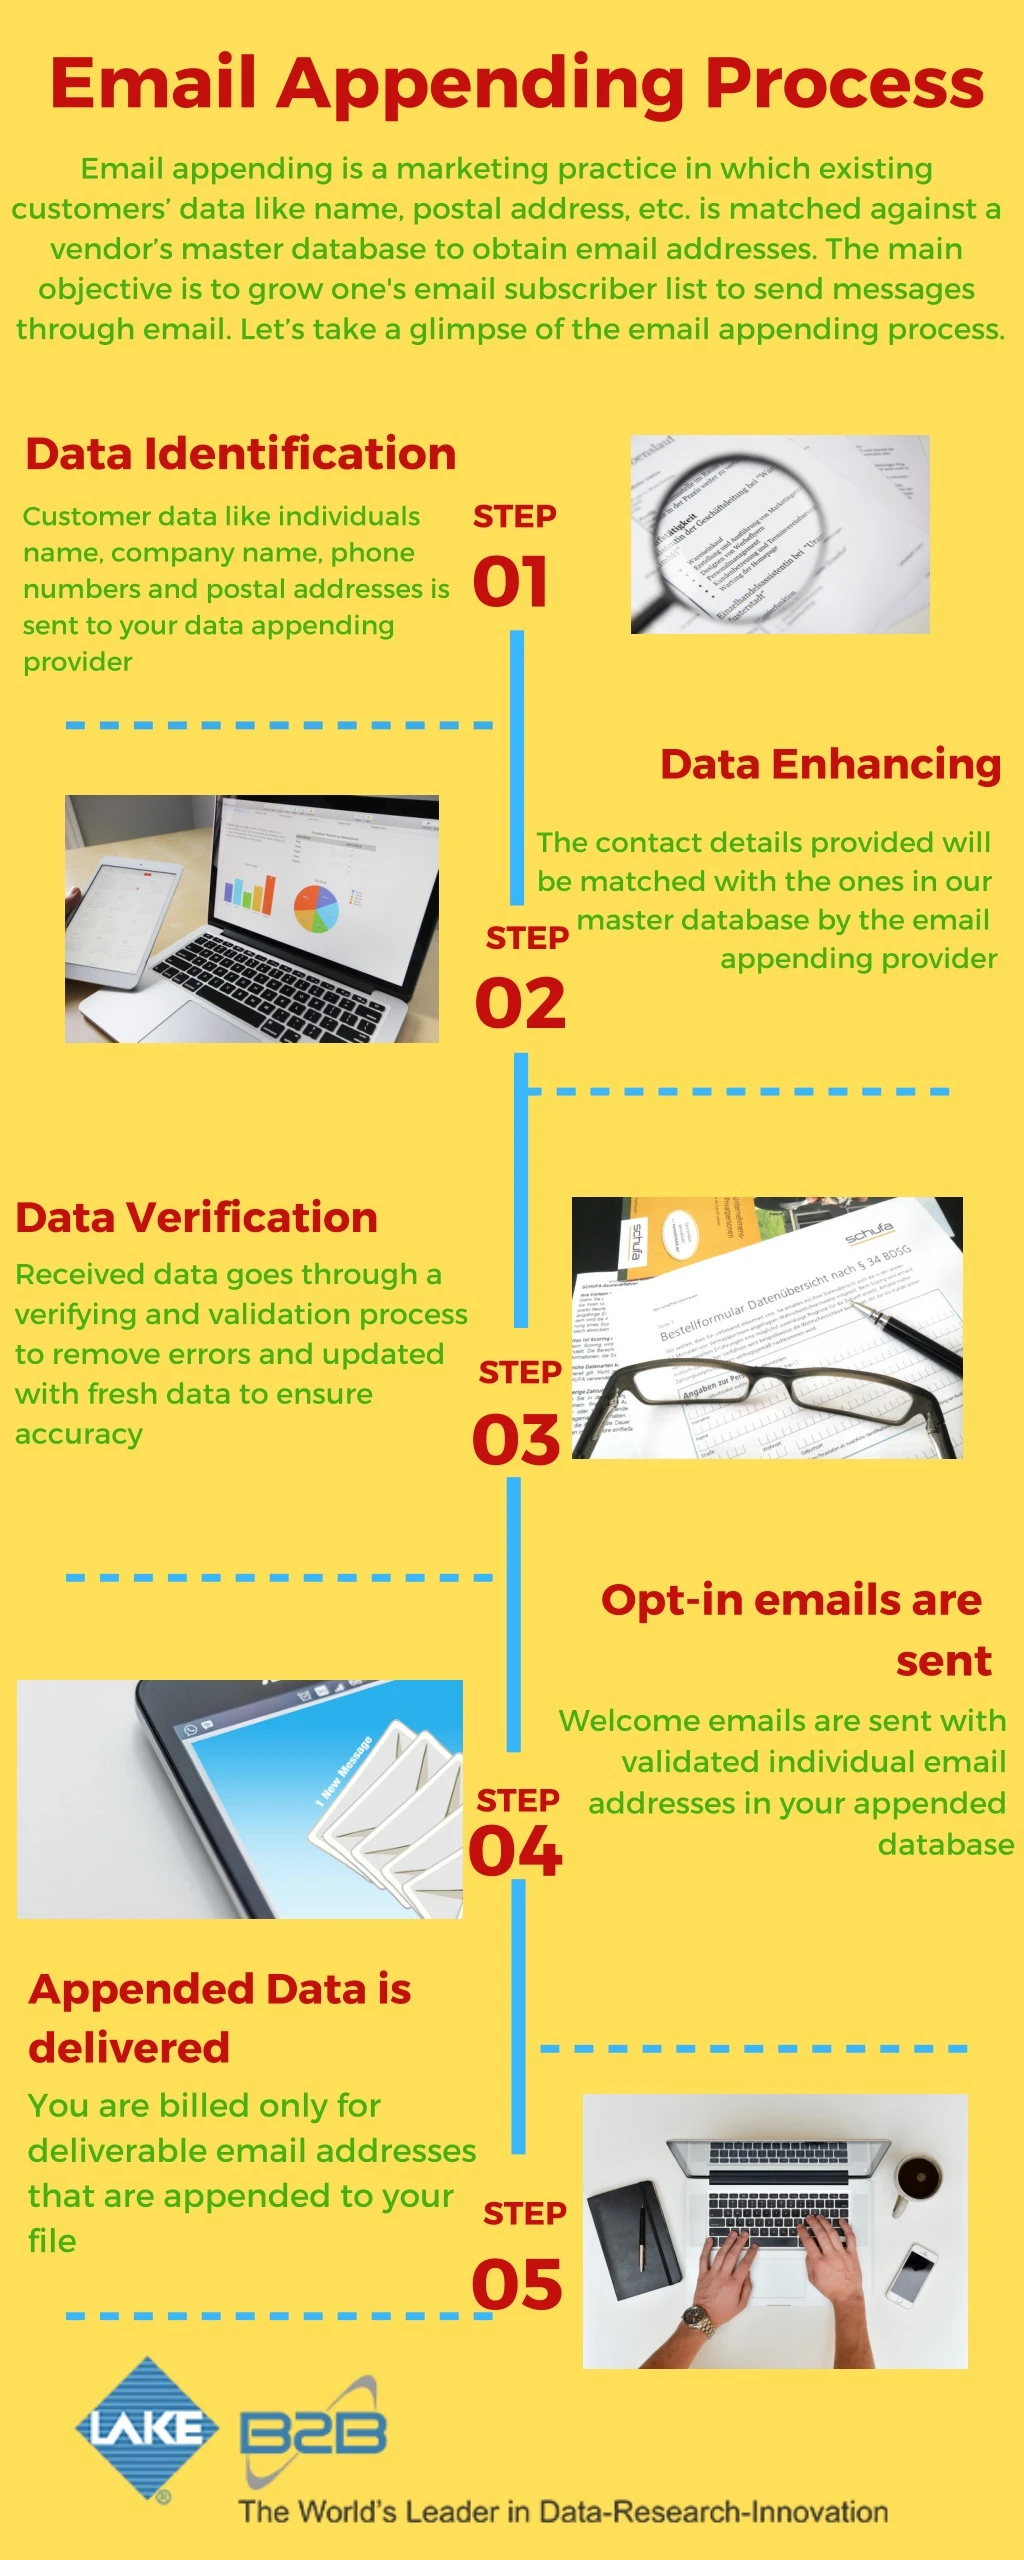 email appending process